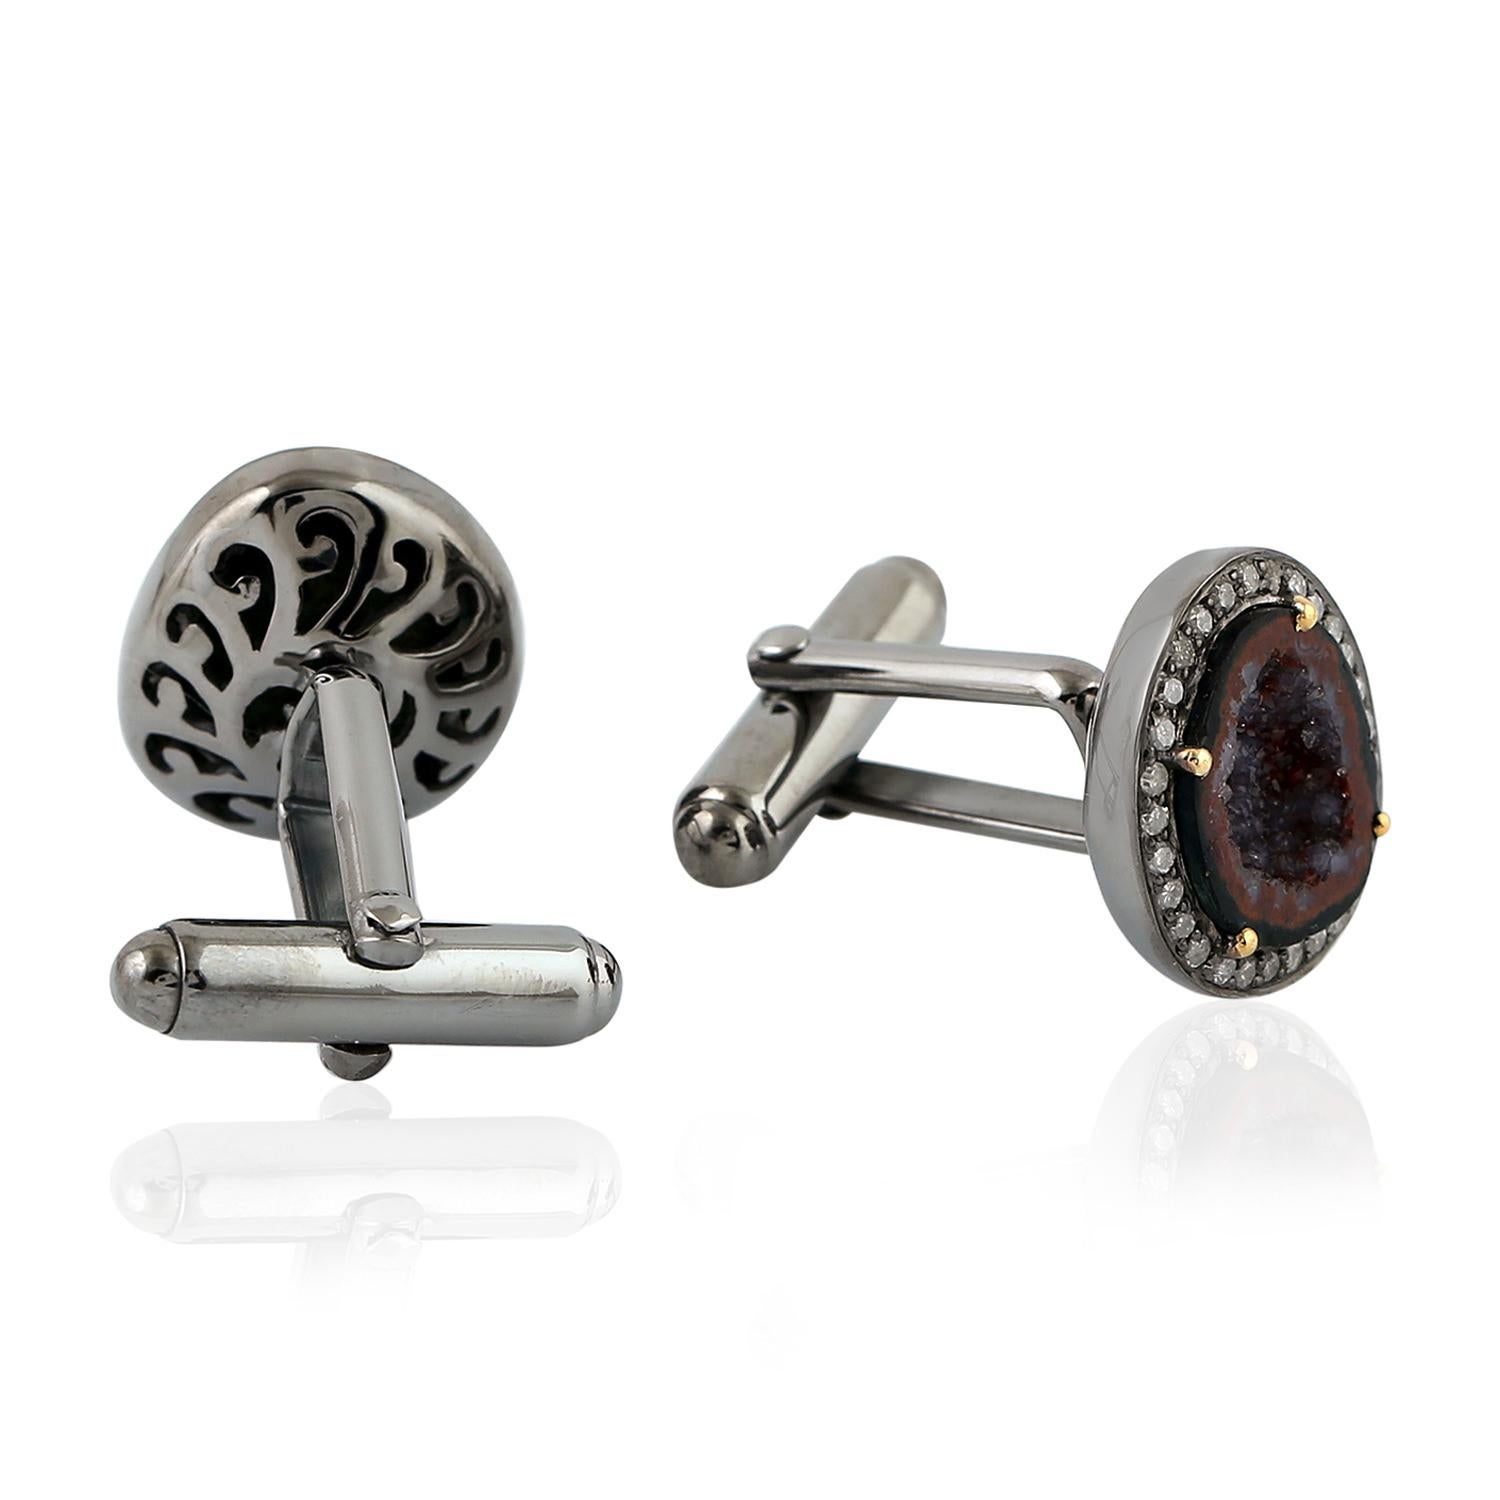 Cast from 18-karat gold and sterling silver, these cuff links are hand set with natural geodes and .50 carats of pave diamonds in black rhodium.

FOLLOW  MEGHNA JEWELS storefront to view the latest collection & exclusive pieces.  Meghna Jewels is